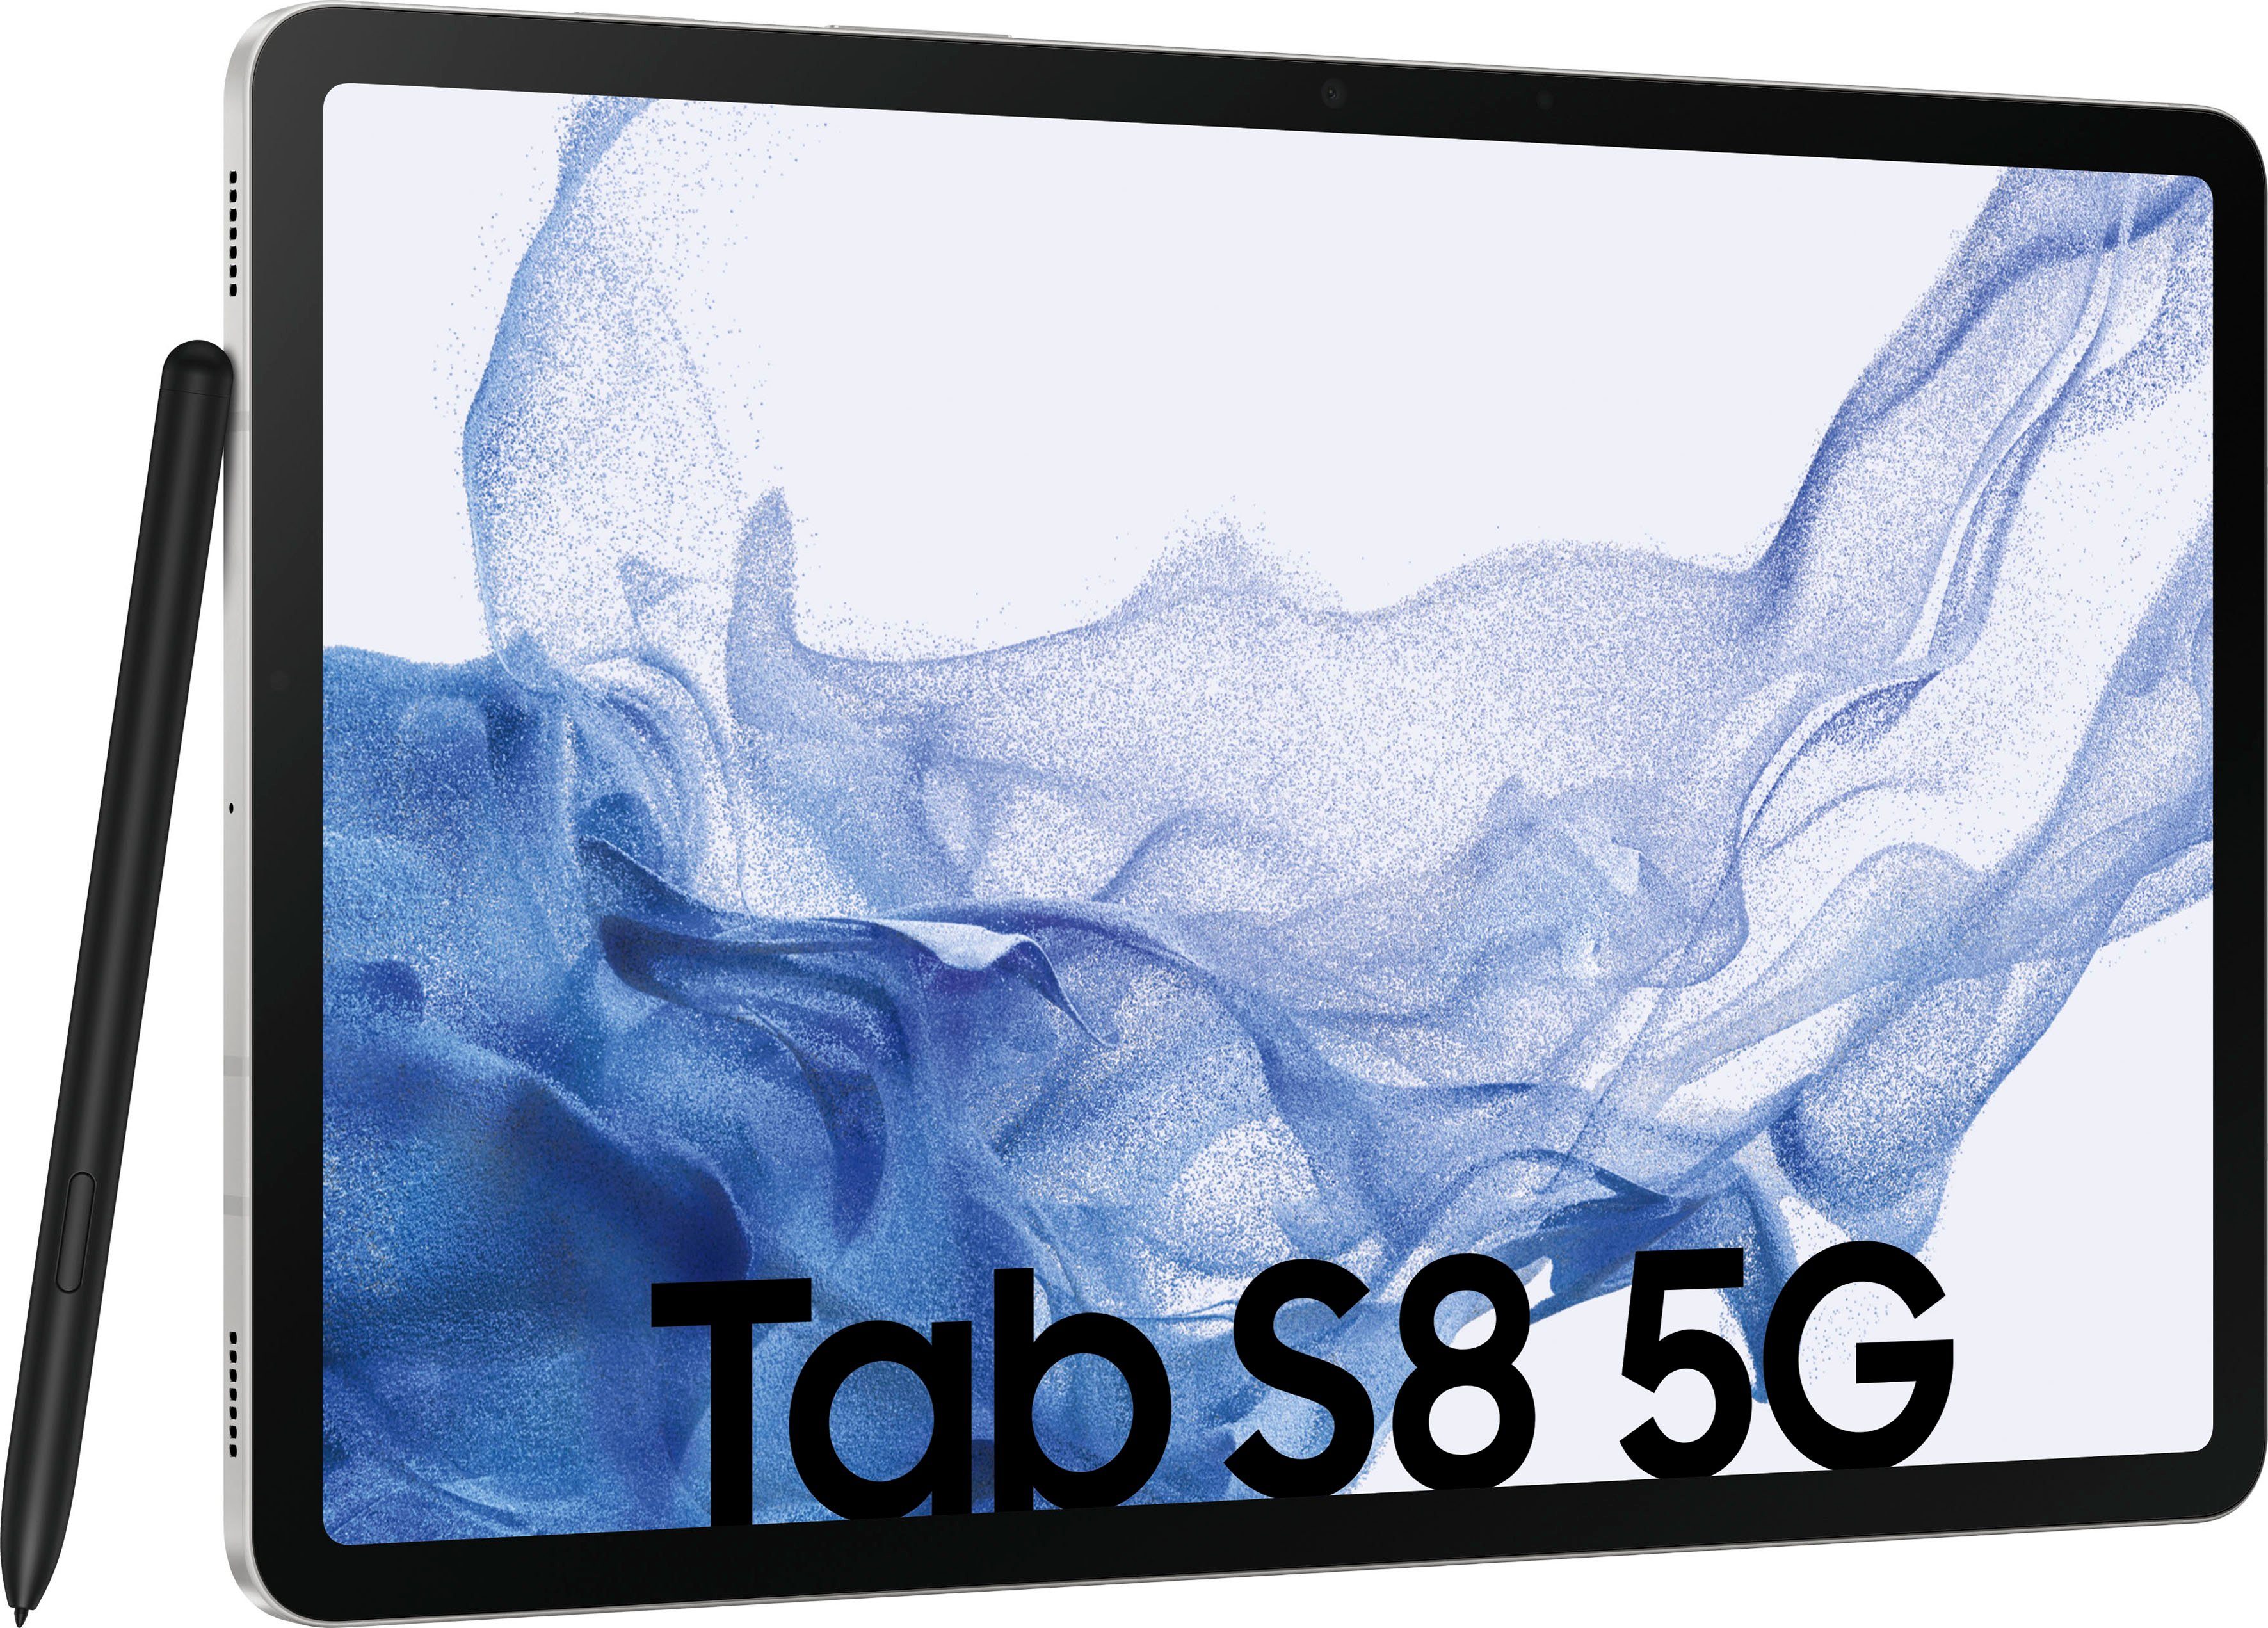 Samsung Galaxy Tab S8 5G GB, Silber Android, 128 (11", 5G) Tablet